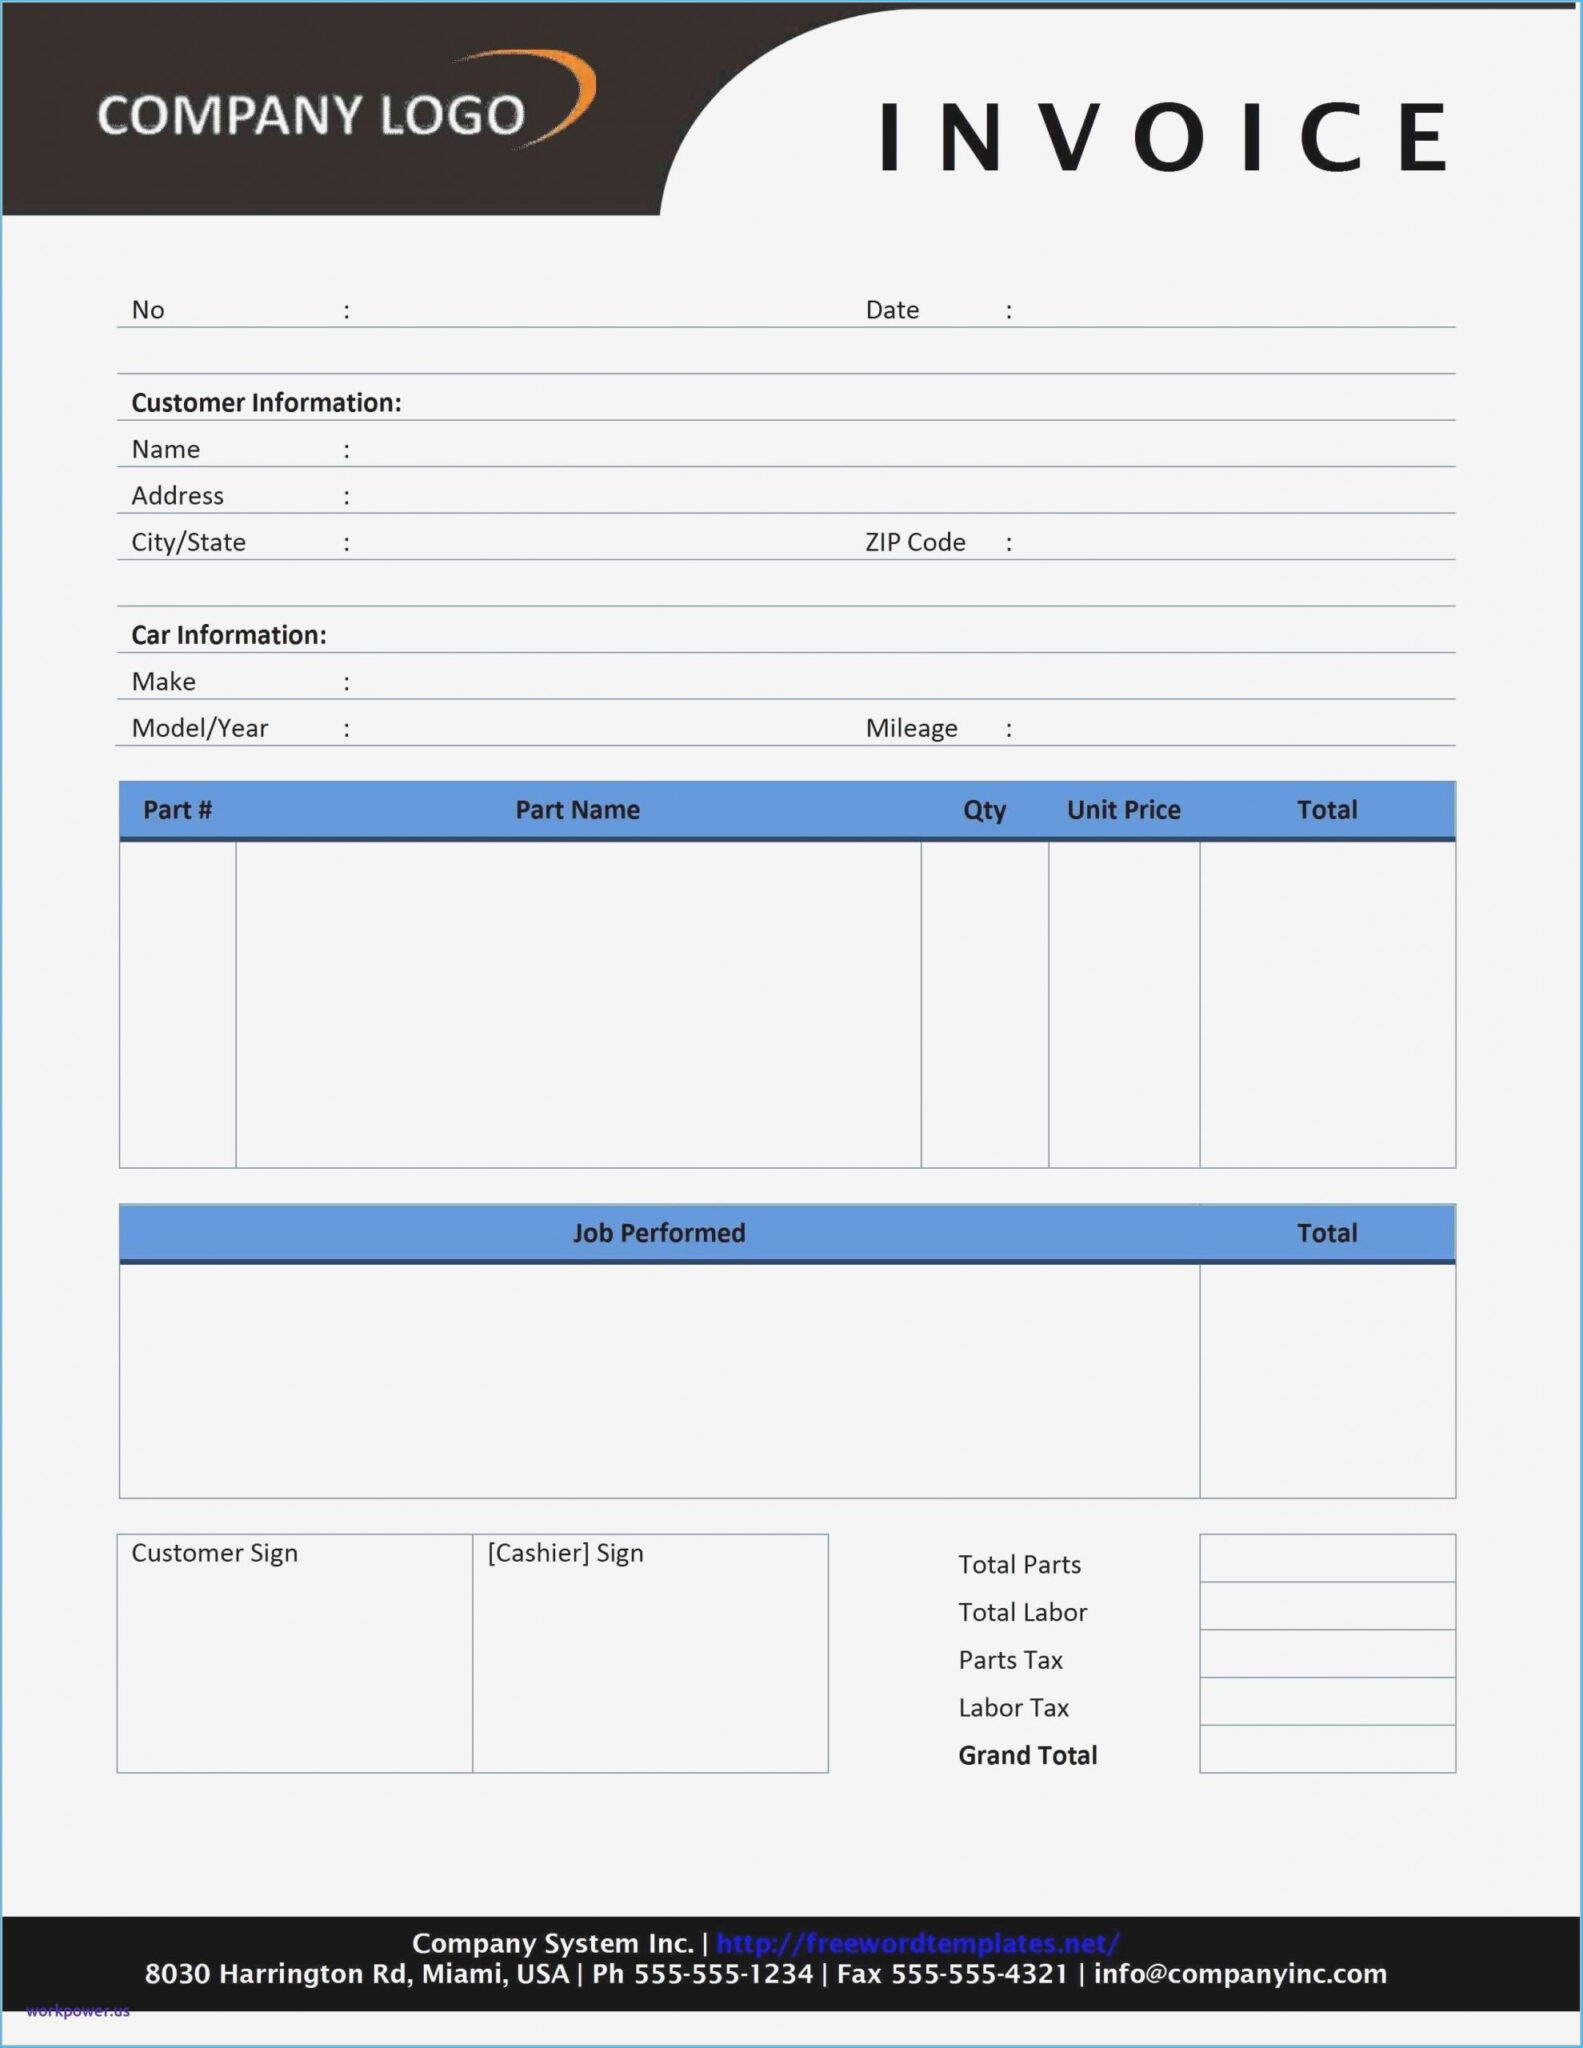 Libre Calc Invoice Mplate For Libreoffice Free Examples With